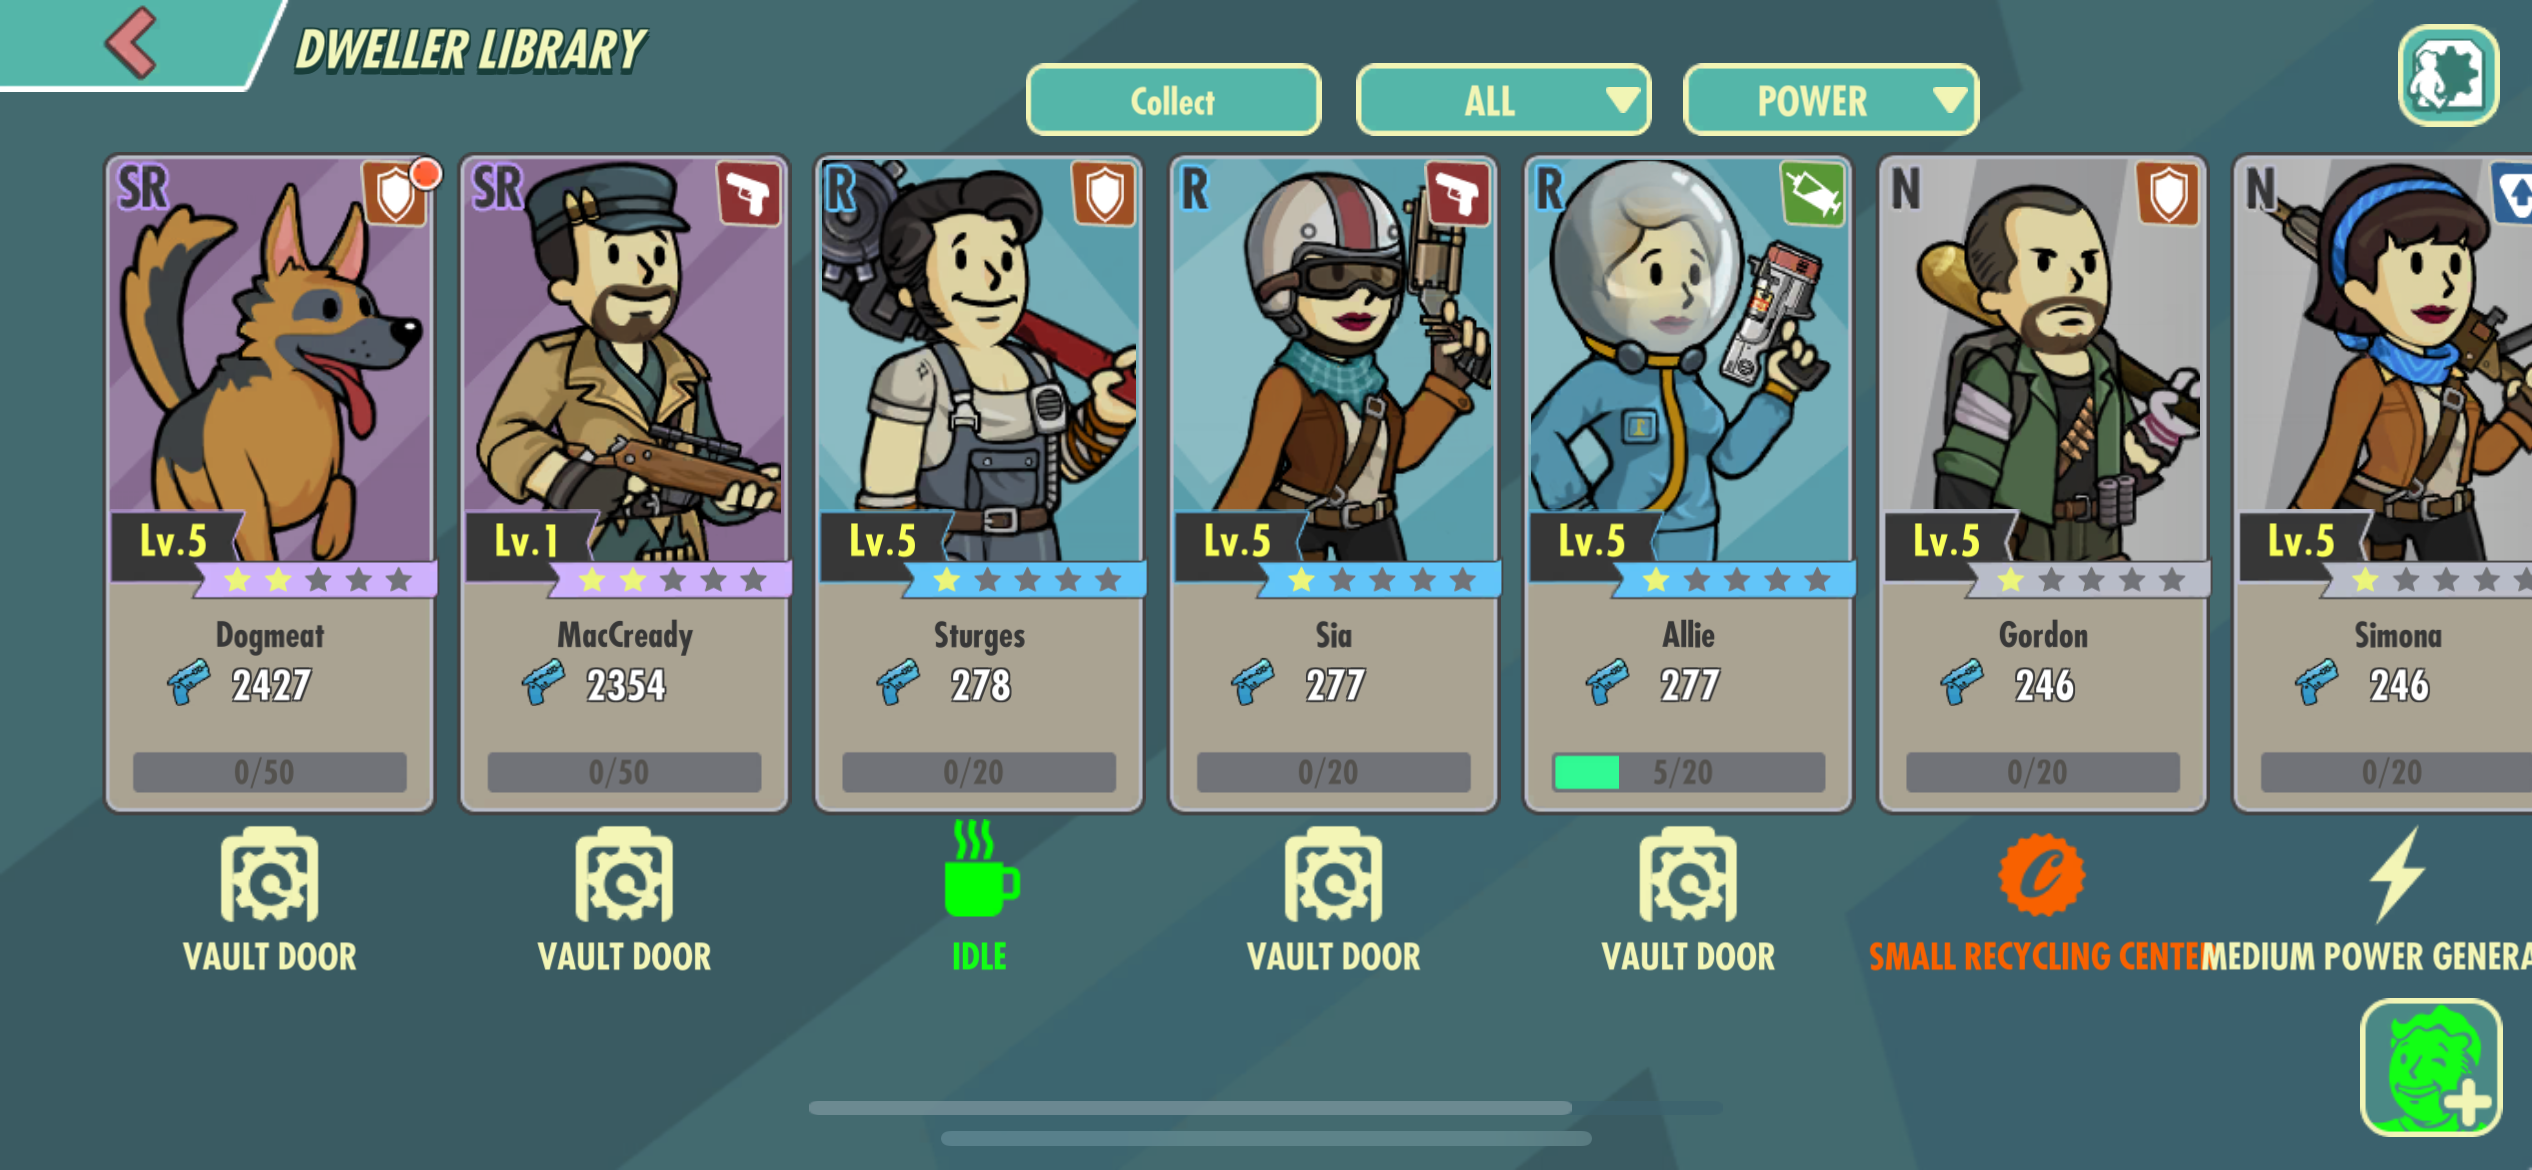 Fallout 4 fallout shelter game фото 97